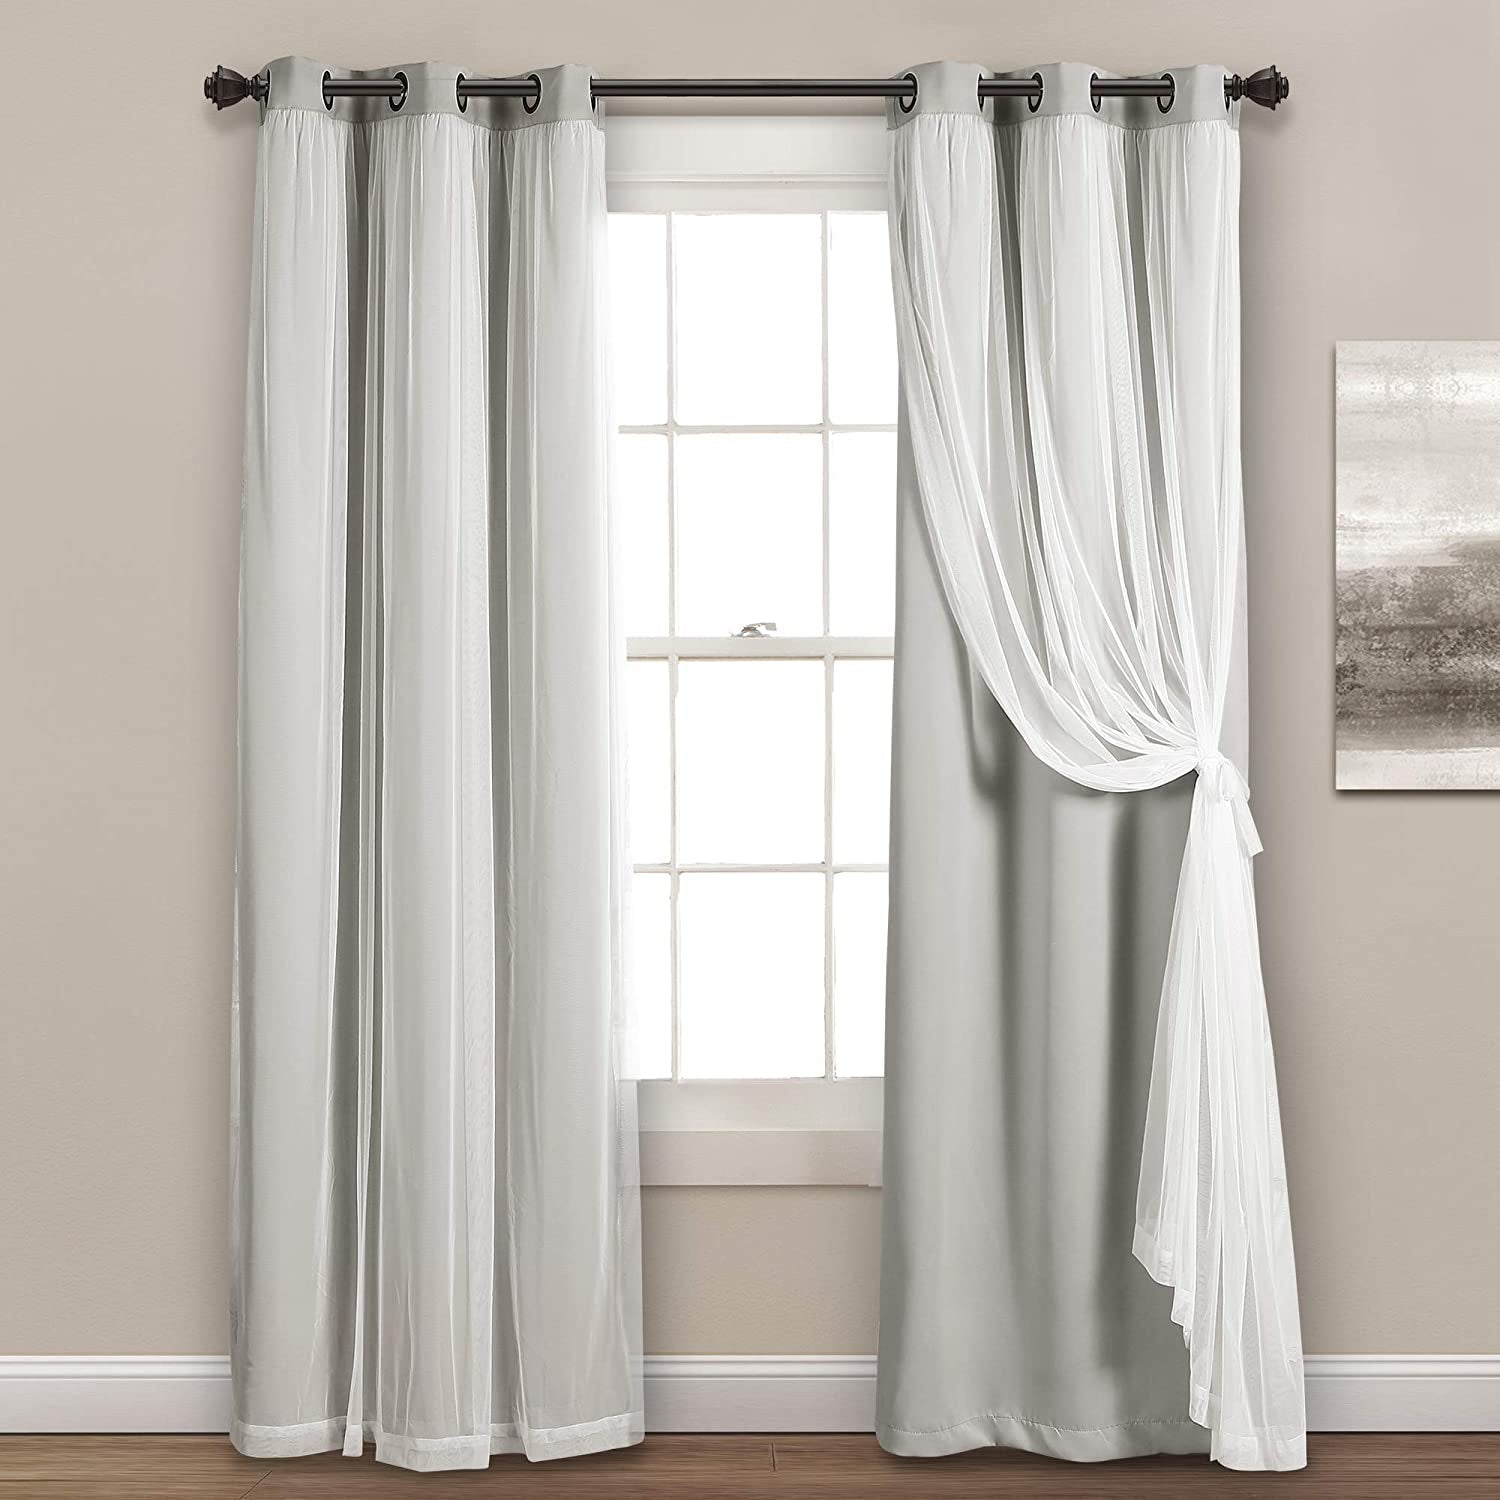 Sheer Grommet Curtains Panel with Insulated Blackout Lining, Room Darkening Window Curtain Set (Pair), 38